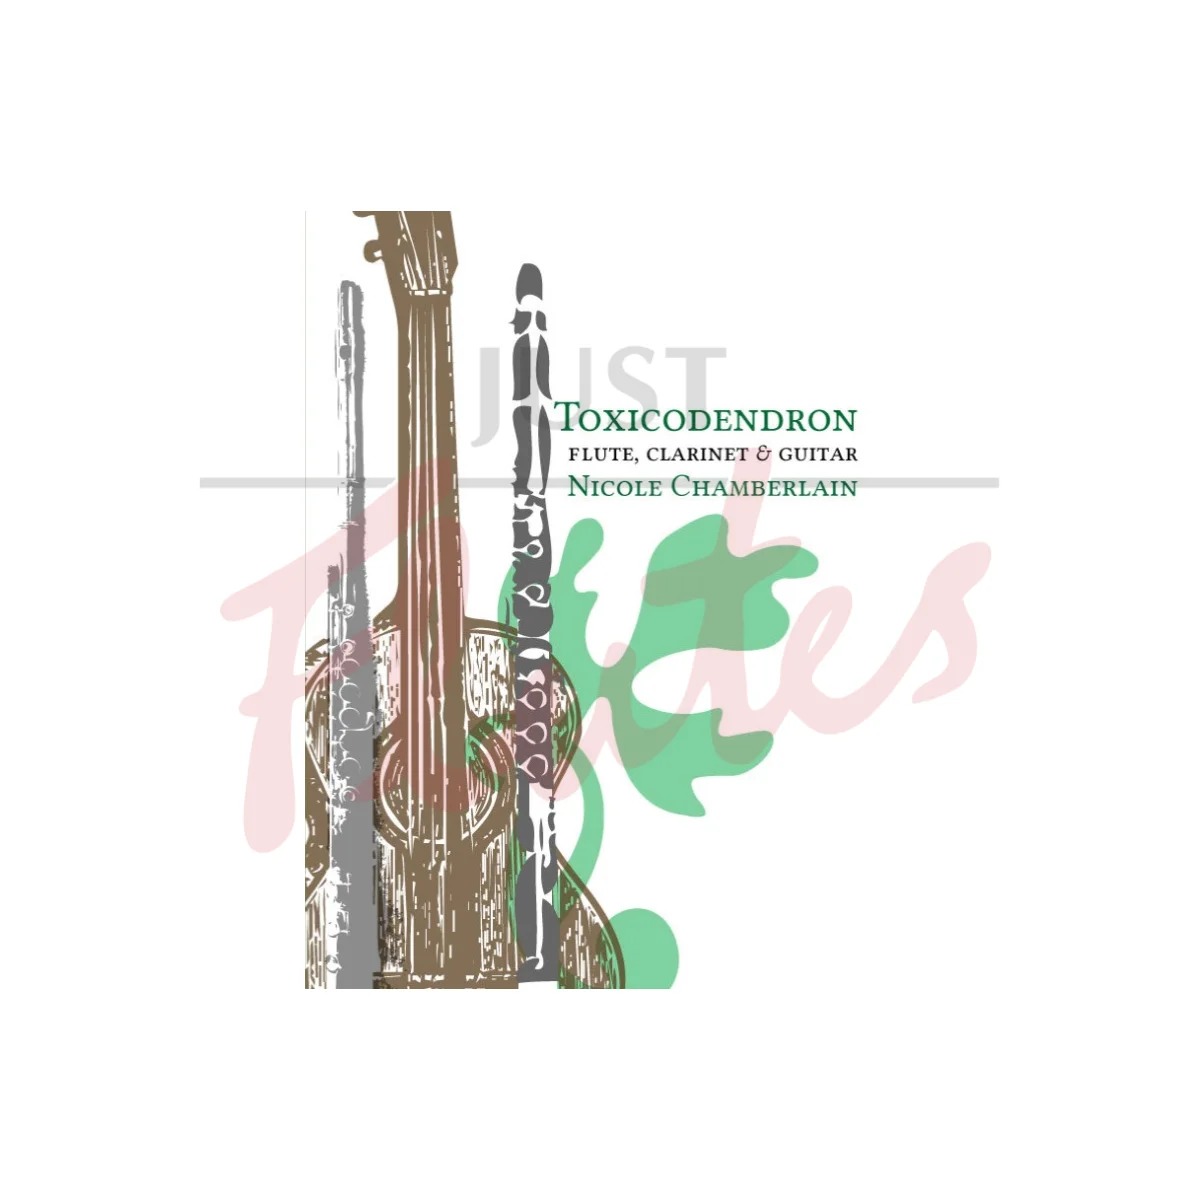 Toxicodendron for Flute, Clarinet and Guitar